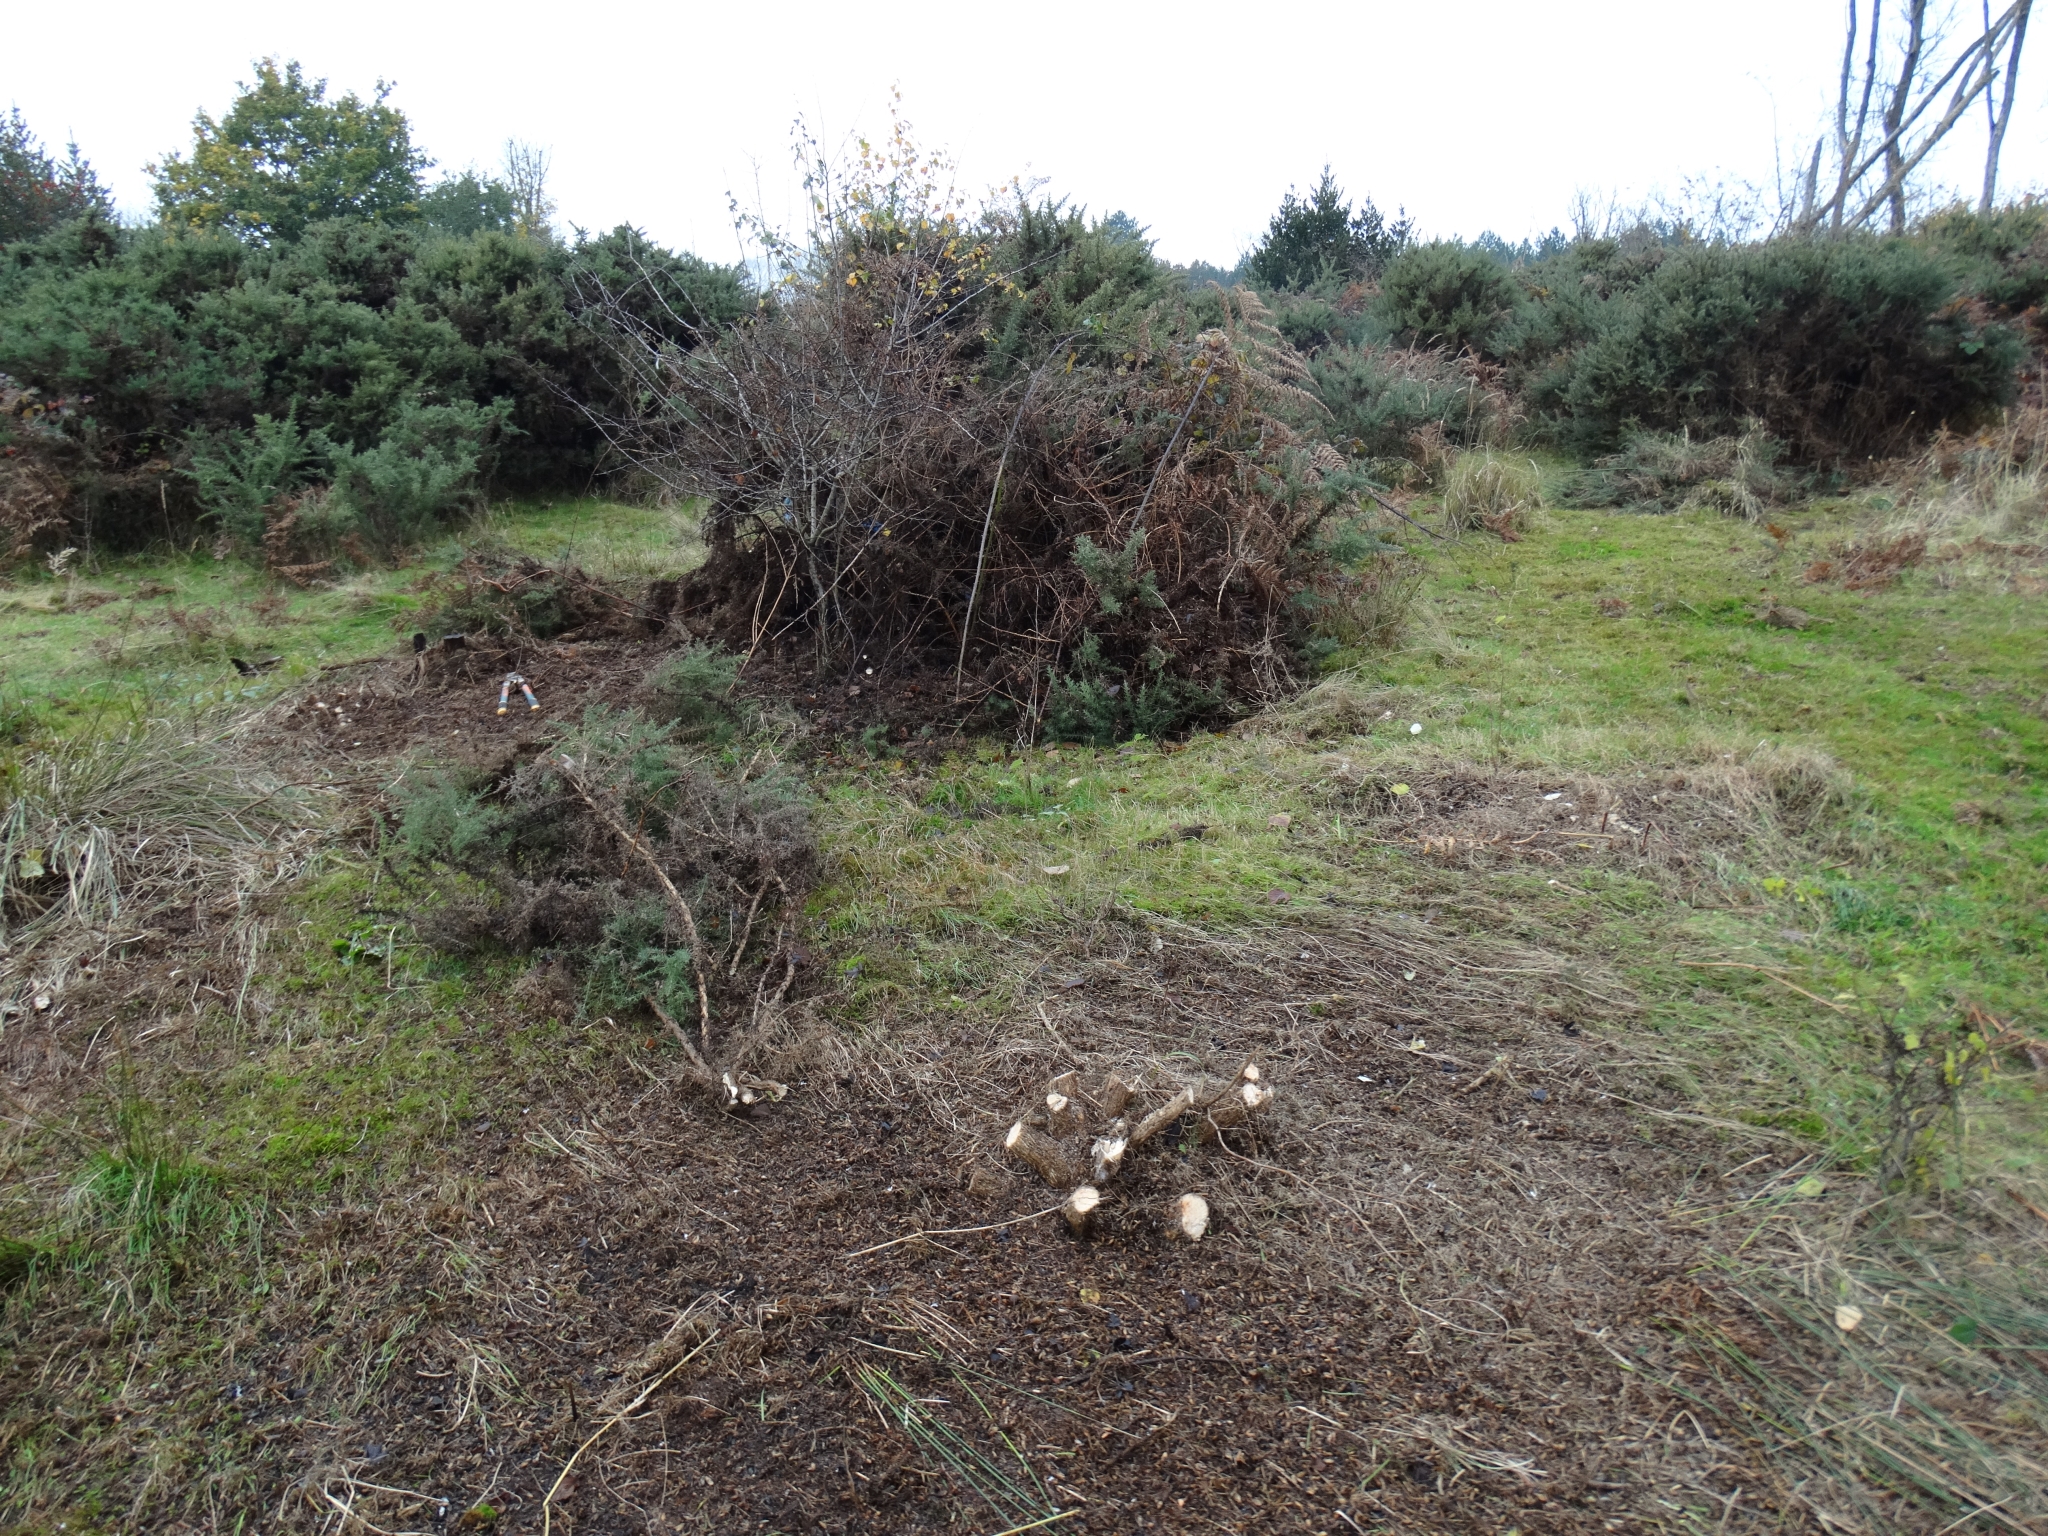 A photo from the FoTF Conservation Event - November 2019 - Gorse Clearance at Hockham Hills & Holes : An area cleared of Gorse by volunteers